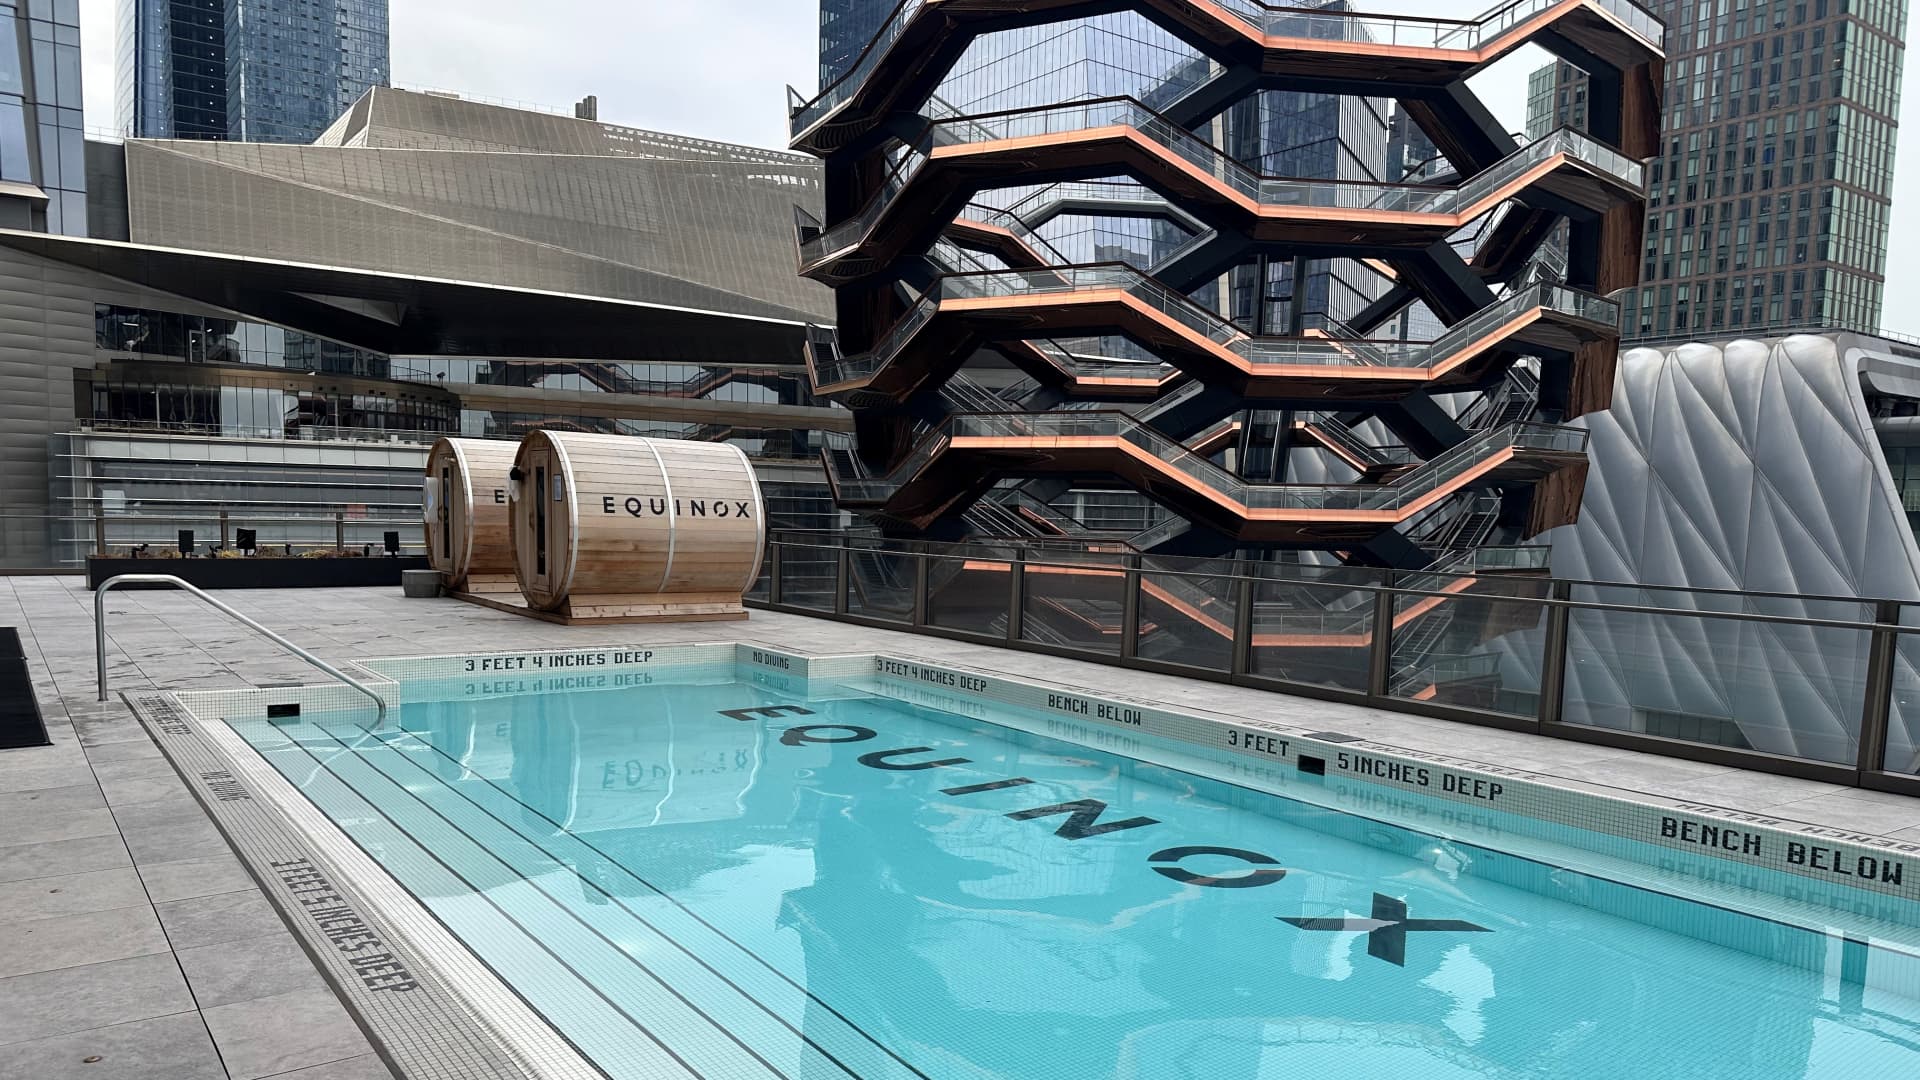 I tried 2 spa treatments that this luxury NYC hotel says will improve sleep—here's how it went